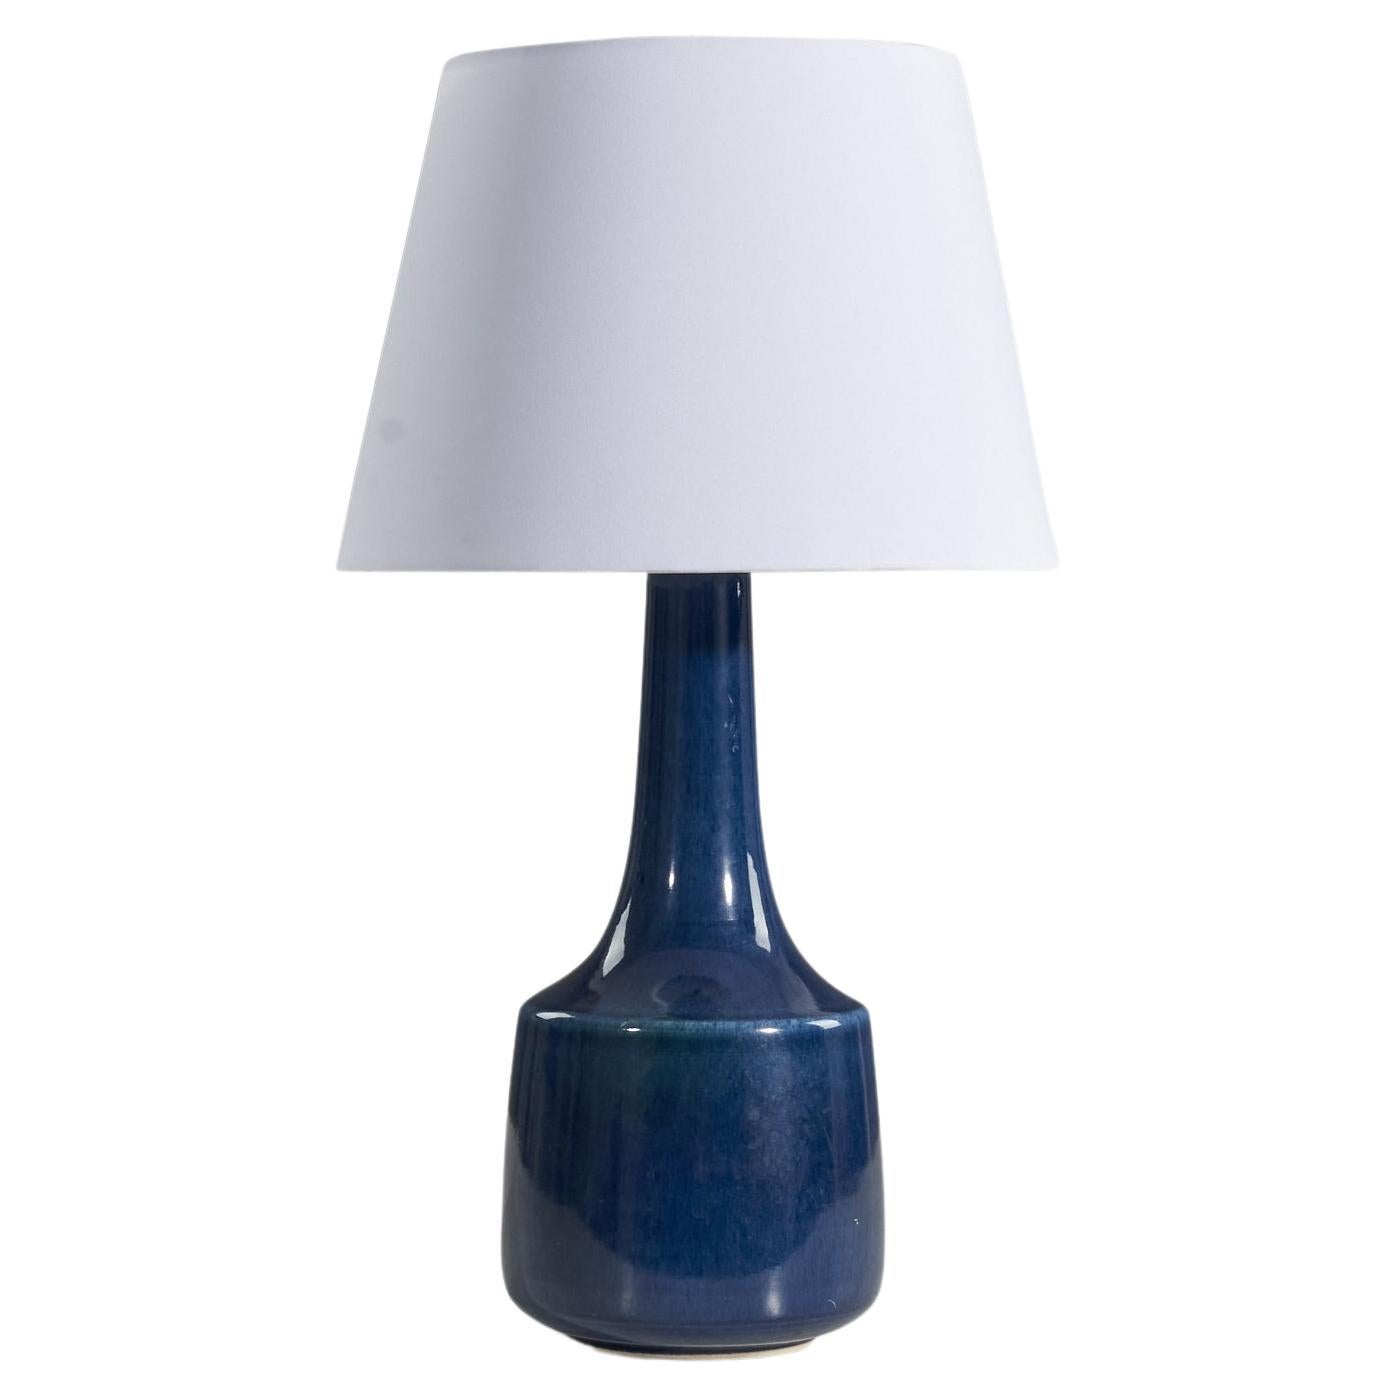 Lotte and Gunnar Bostlund, Table Lamp, Blue Ceramic, Brass, Fabric Canada, 1960s For Sale